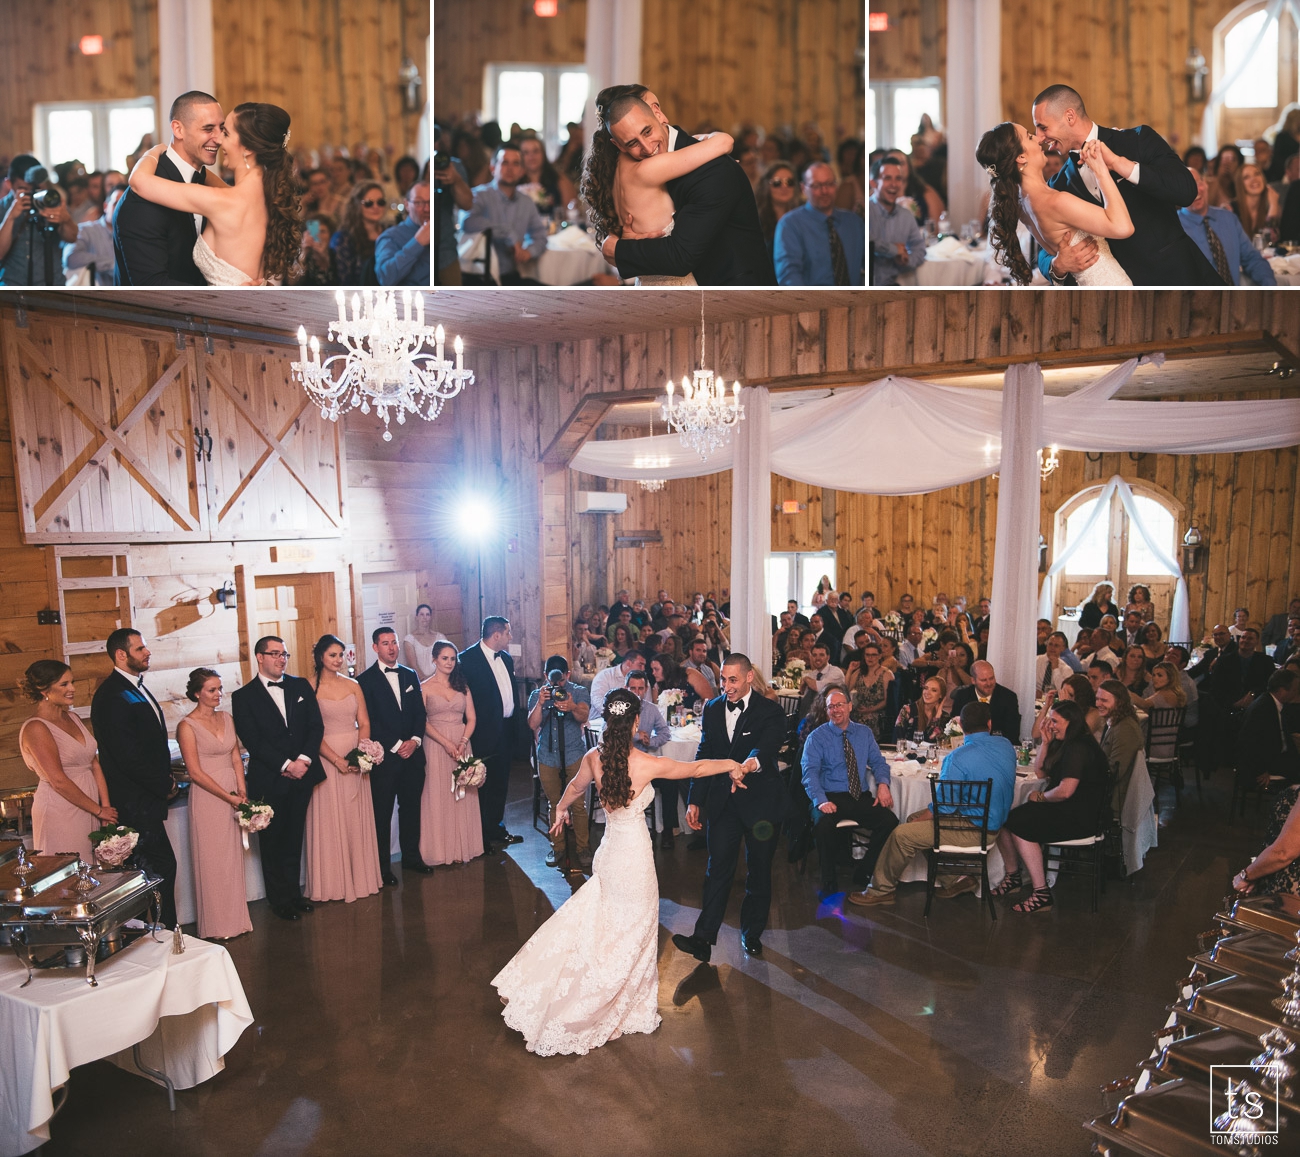 Alexandra and Jared's Wedding at Wolf Oak Acres